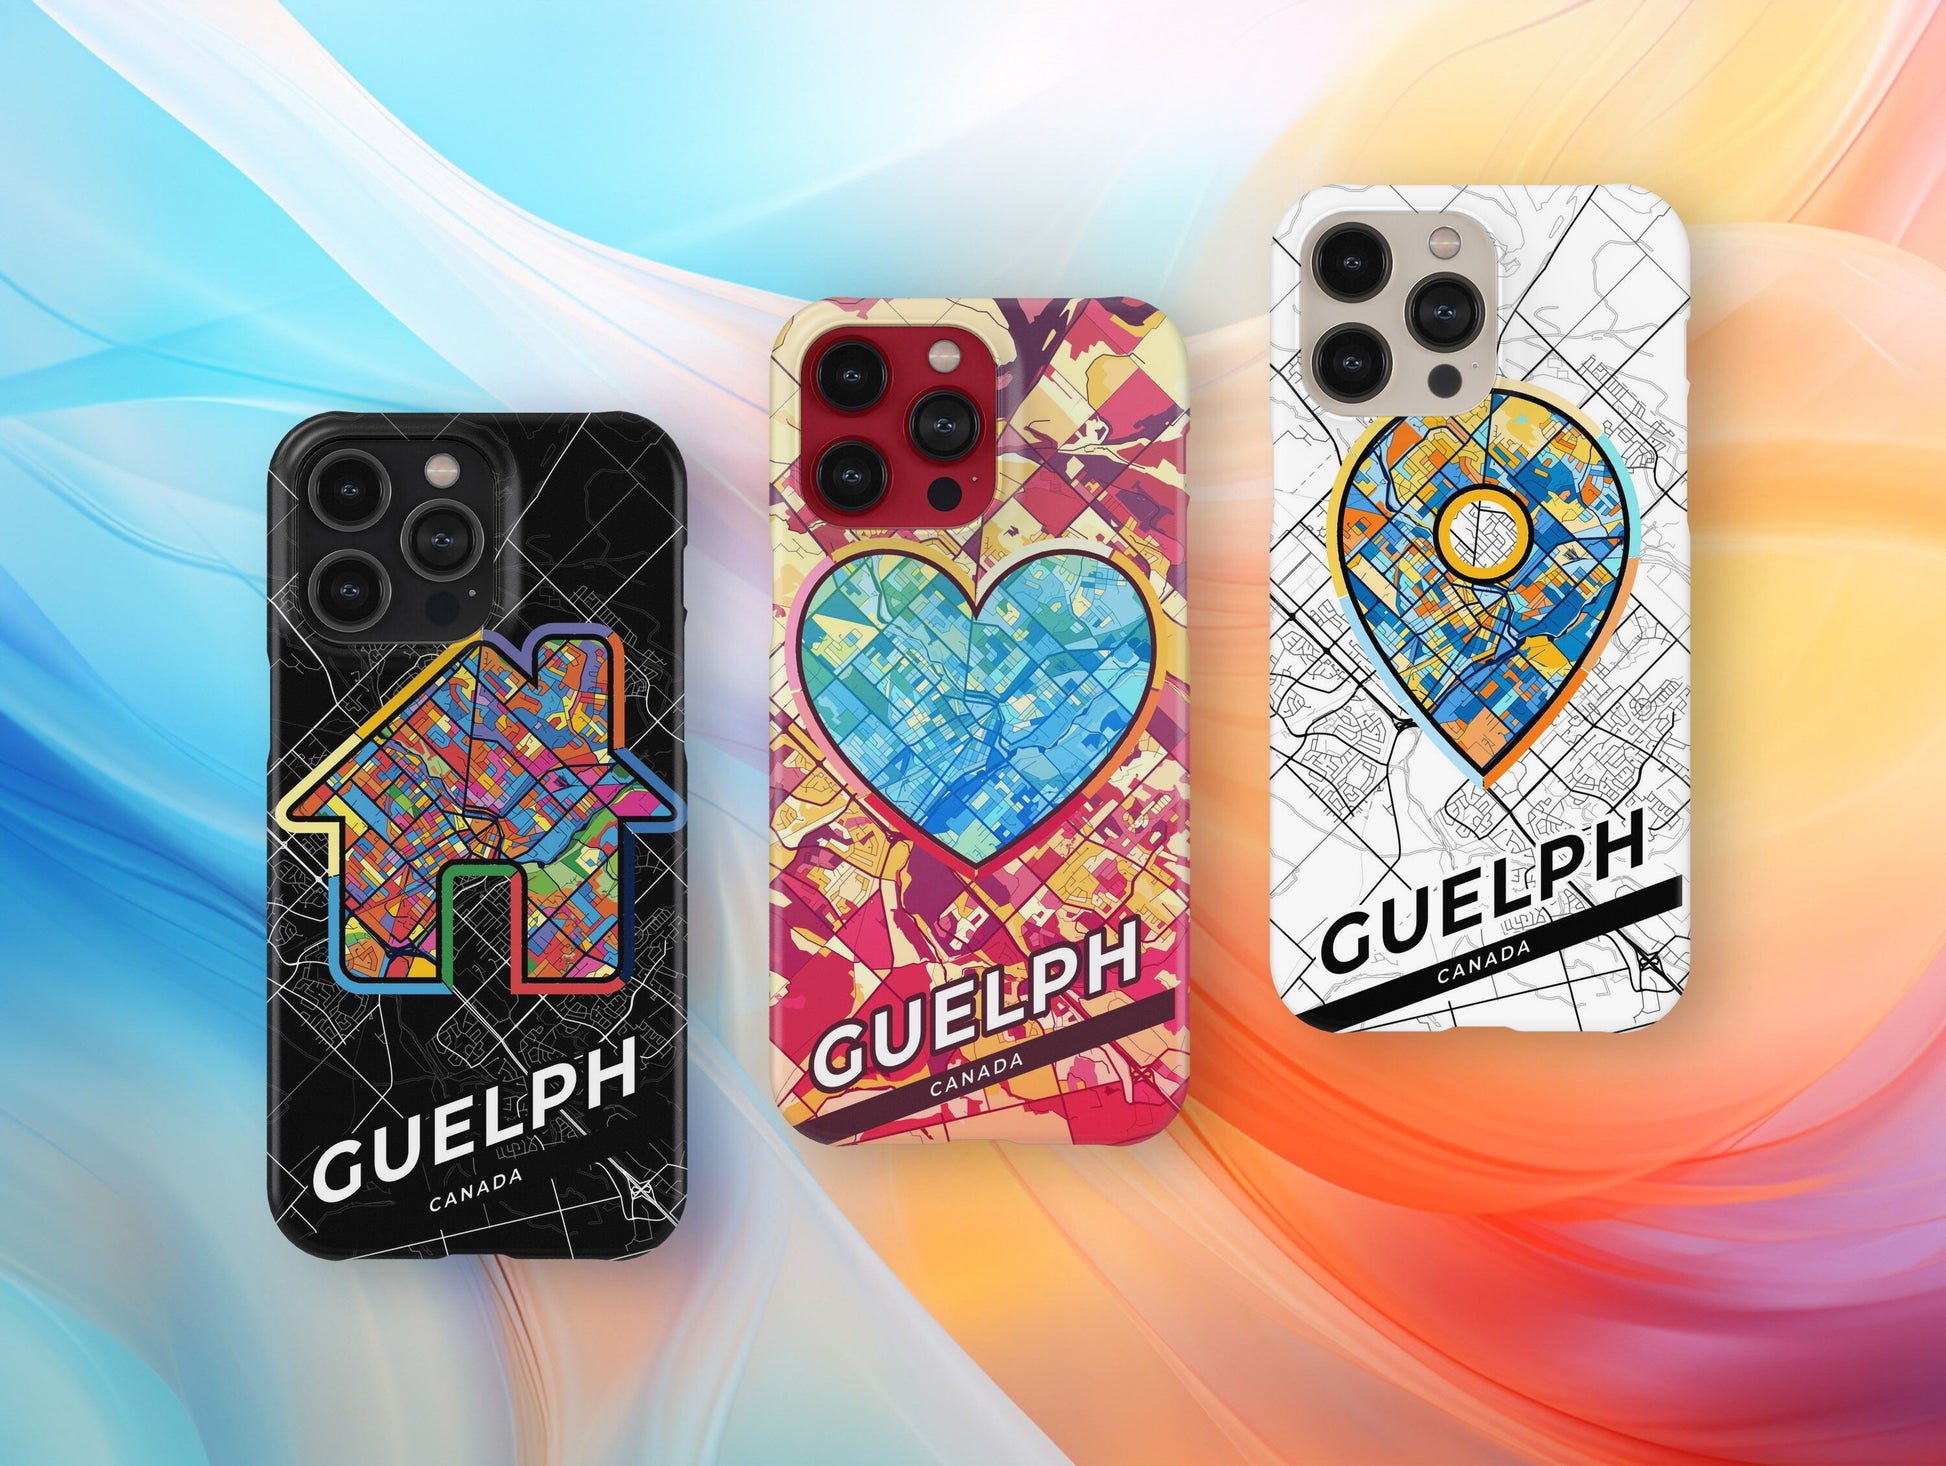 Guelph Canada slim phone case with colorful icon. Birthday, wedding or housewarming gift. Couple match cases.